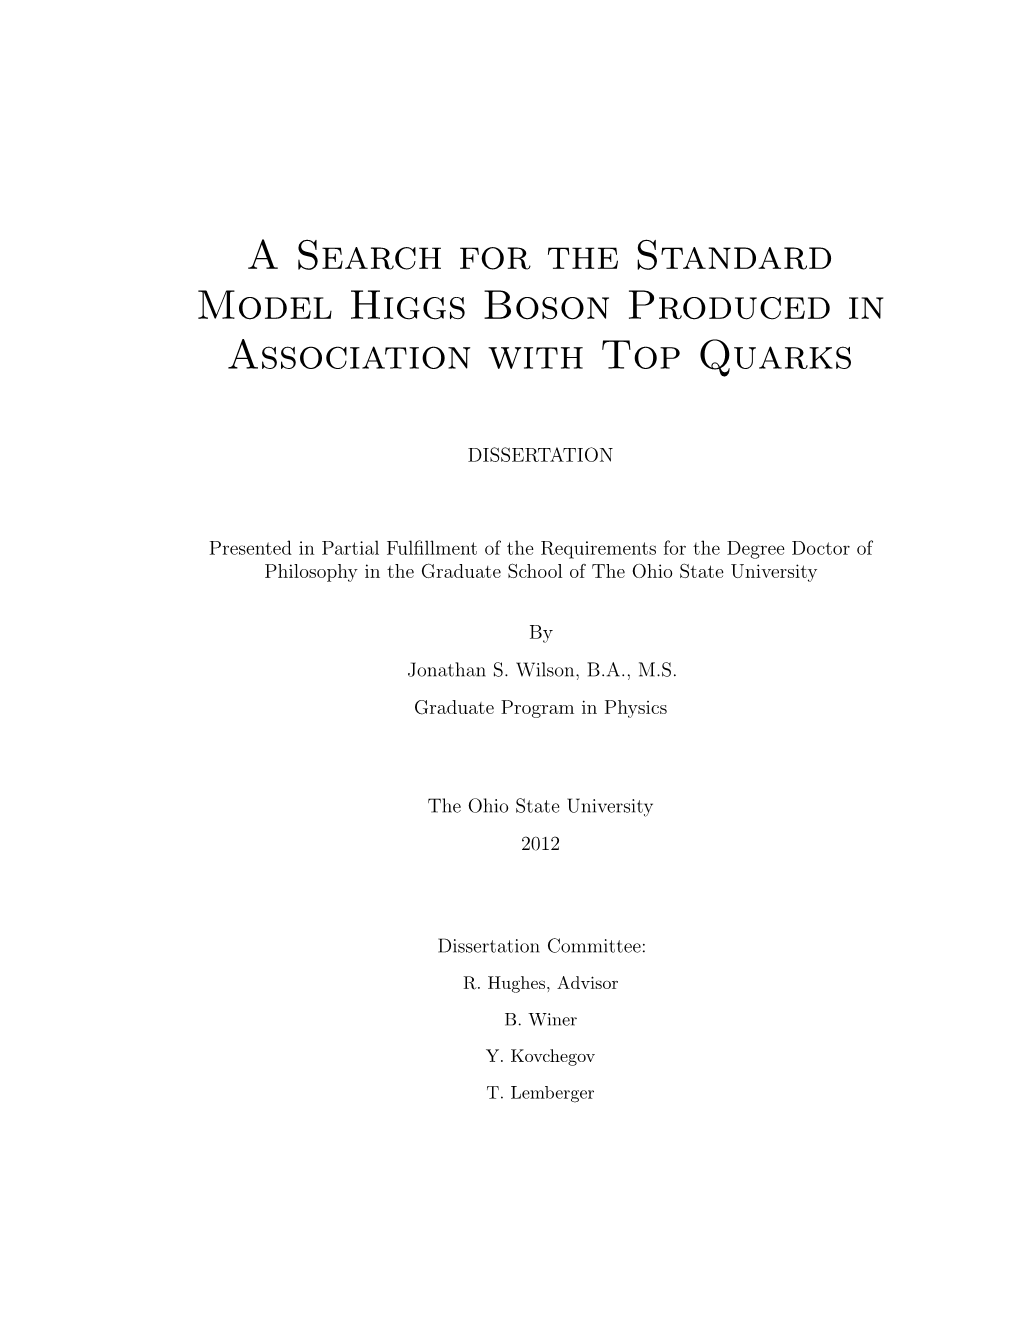 A Search for the Standard Model Higgs Boson Produced in Association with Top Quarks